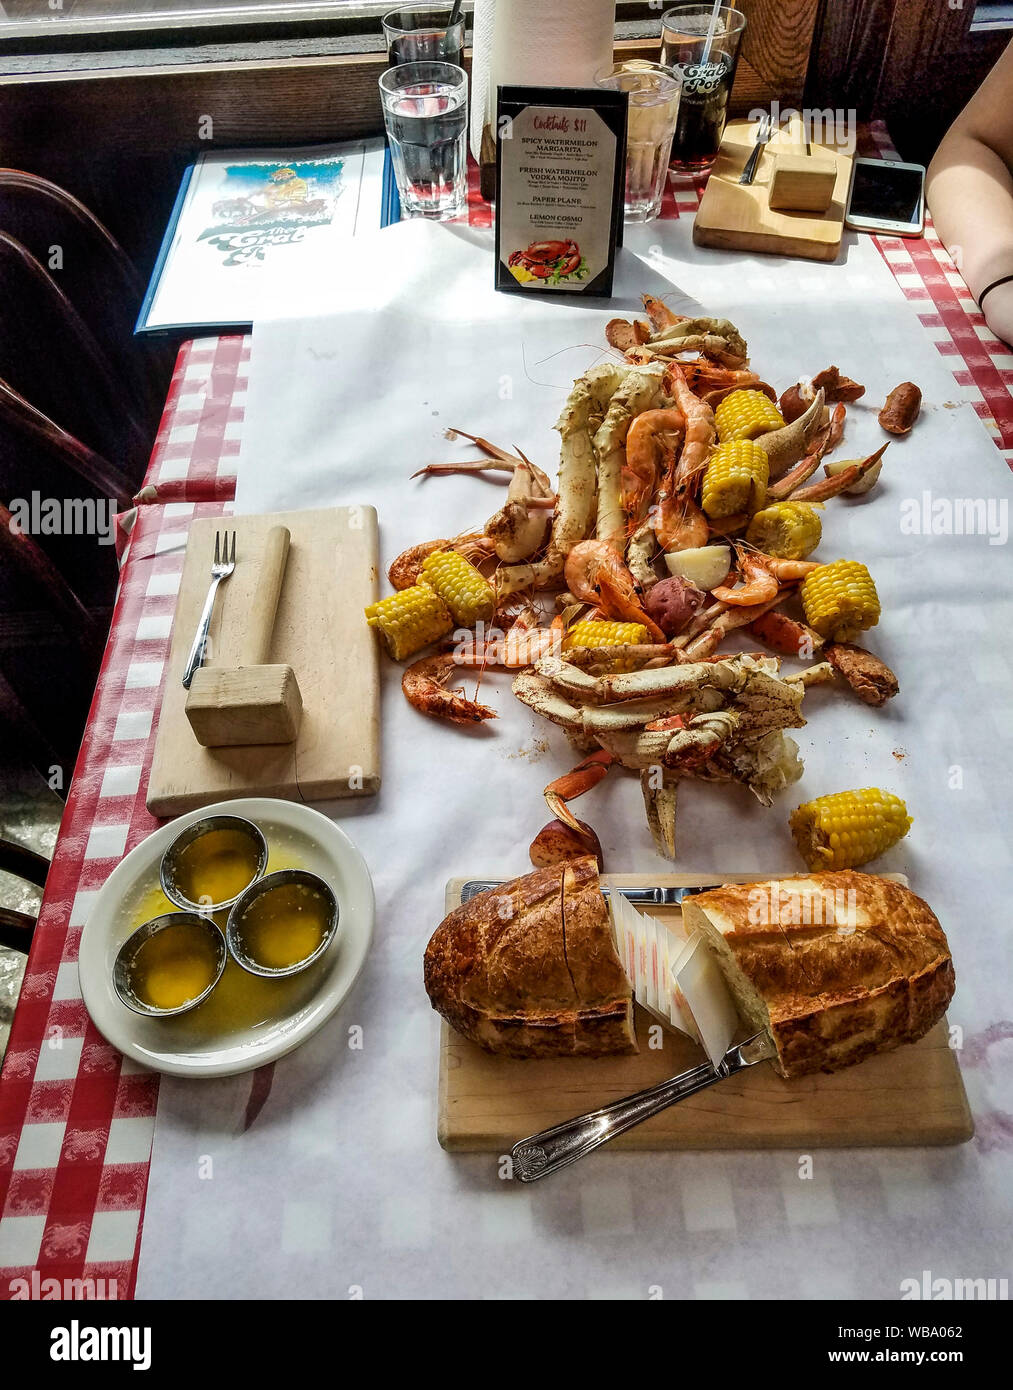 The Royal Crab Feast at Seattle's Crab Pot restaurant. It includes four kinds of crab, shrimp, sausage and more. Stock Photo